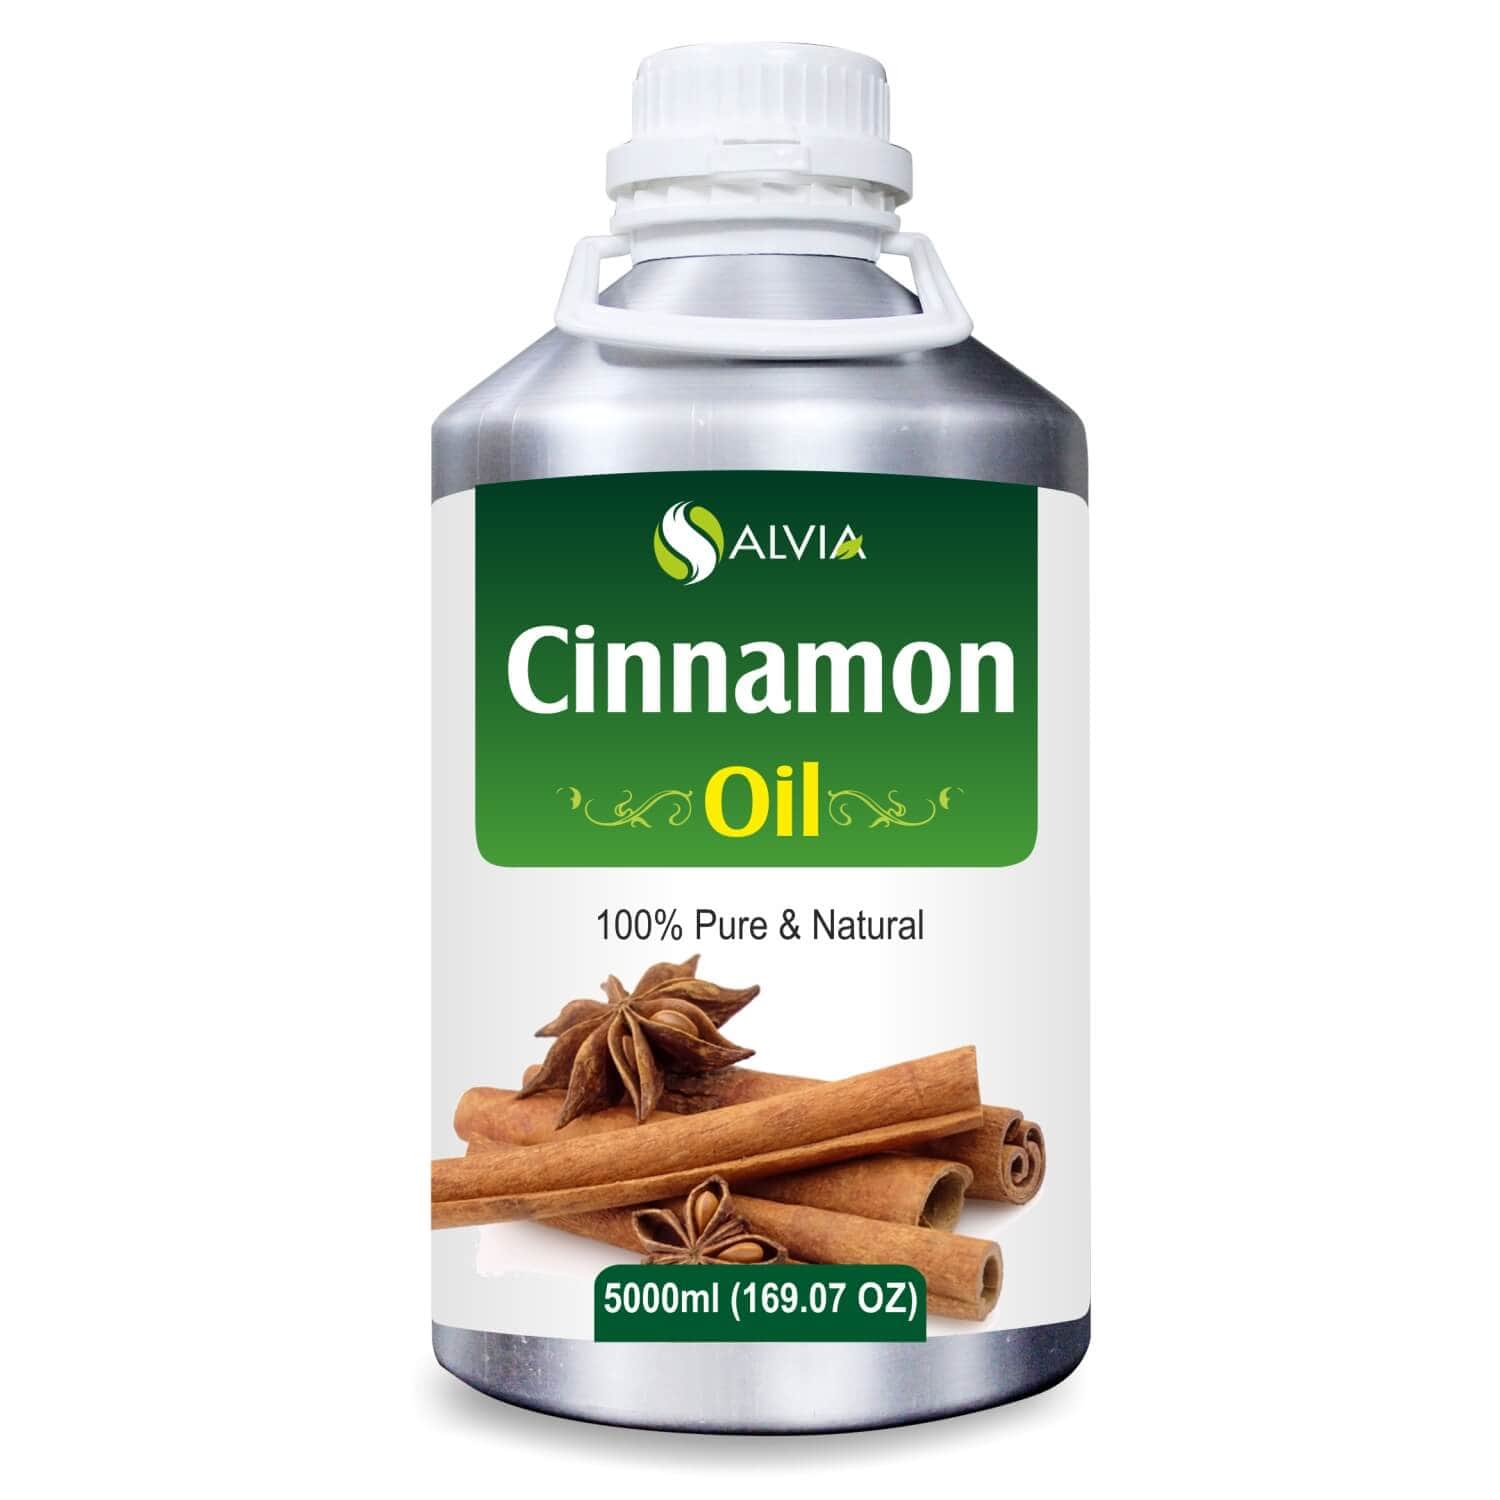 How Does Cinnamon Oil Benefit Your Skin? – Shoprythm